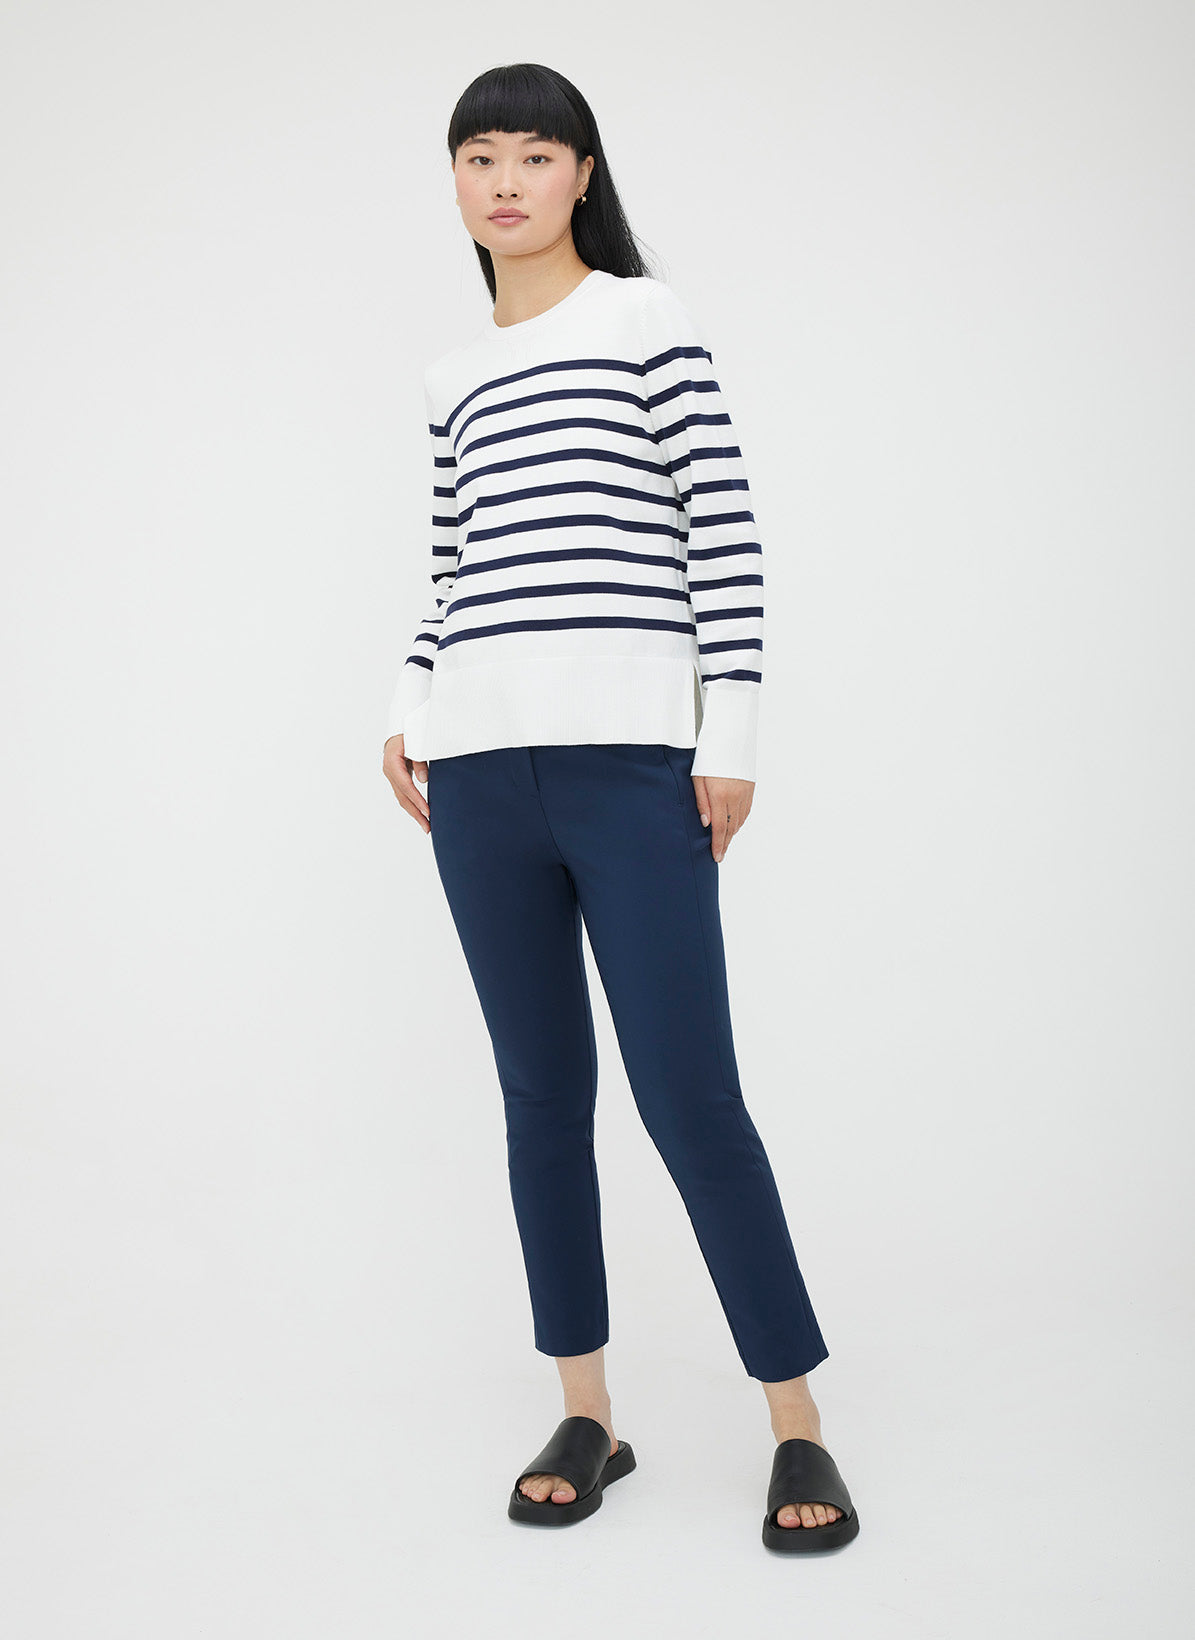 Nolita Cropped Fitted Cardigan ?? || Off White/Navy StripeNolita Crewneck Sweater ?? || Off White/Navy Stripe